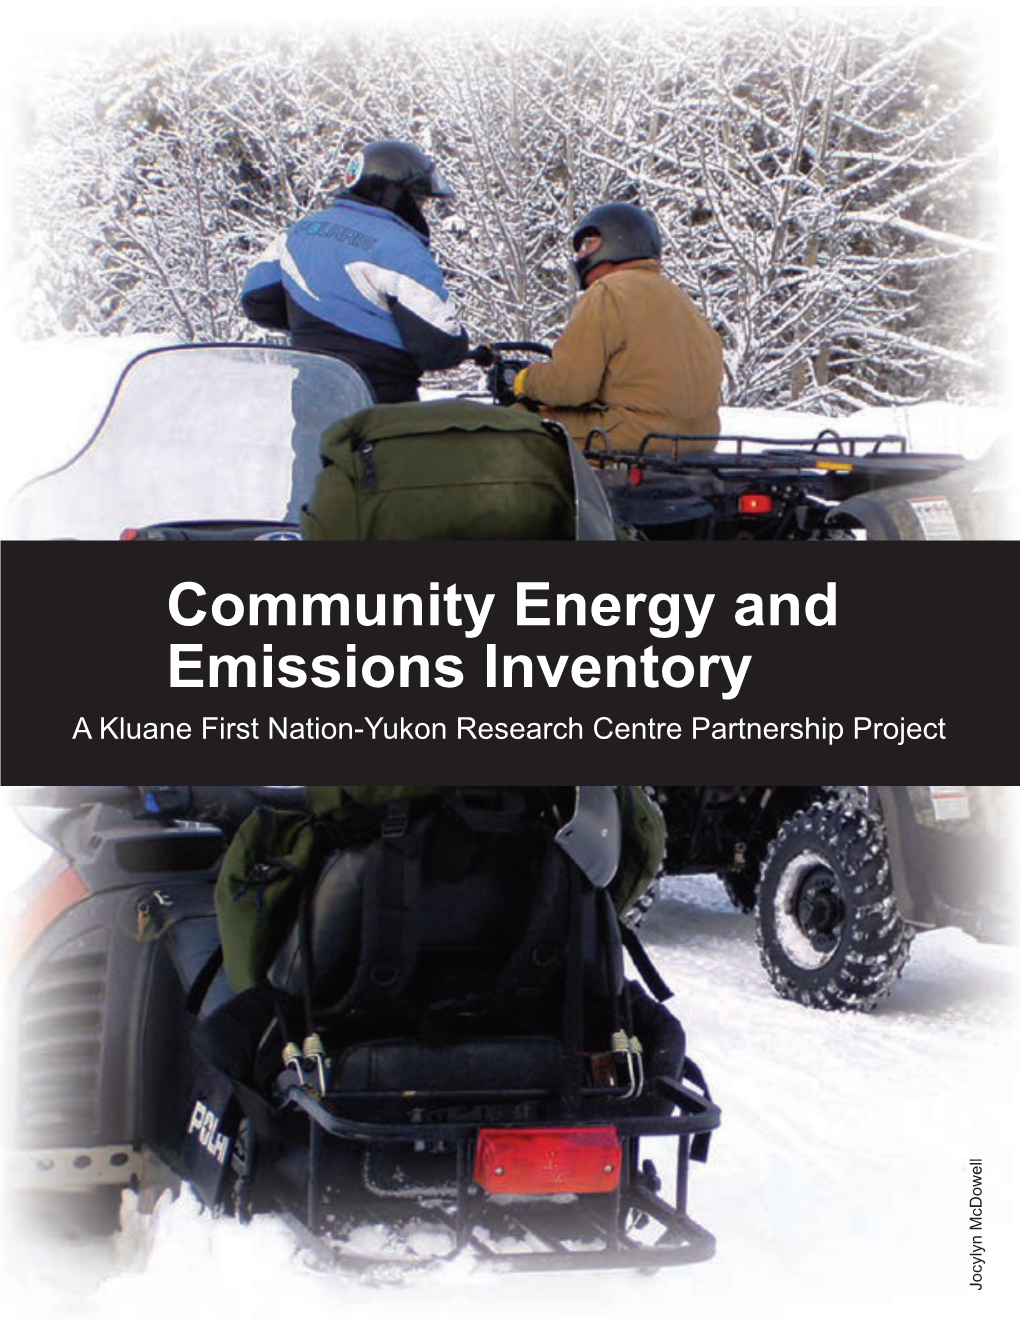 Community Energy and Emissions Inventory a Kluane First Nation-Yukon Research Centre Partnership Project Jocylyn Mcdowell Table of Contents Executive Summary